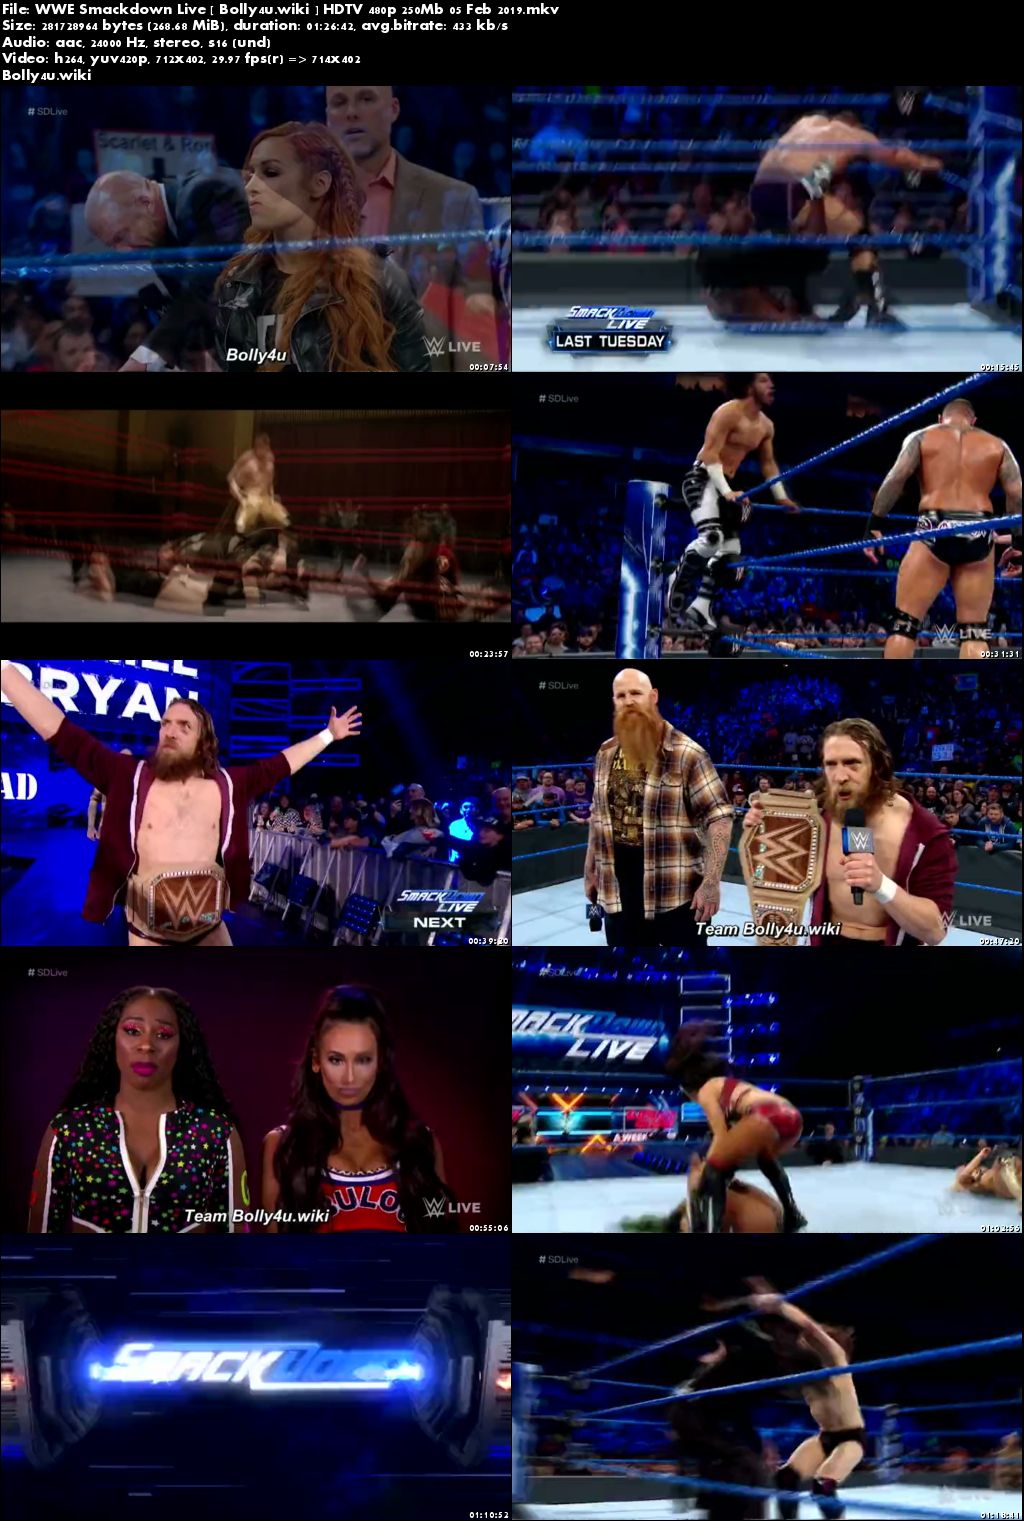 WWE Smackdown Live HDTV 480p 250Mb 05 Feb 2019 Download